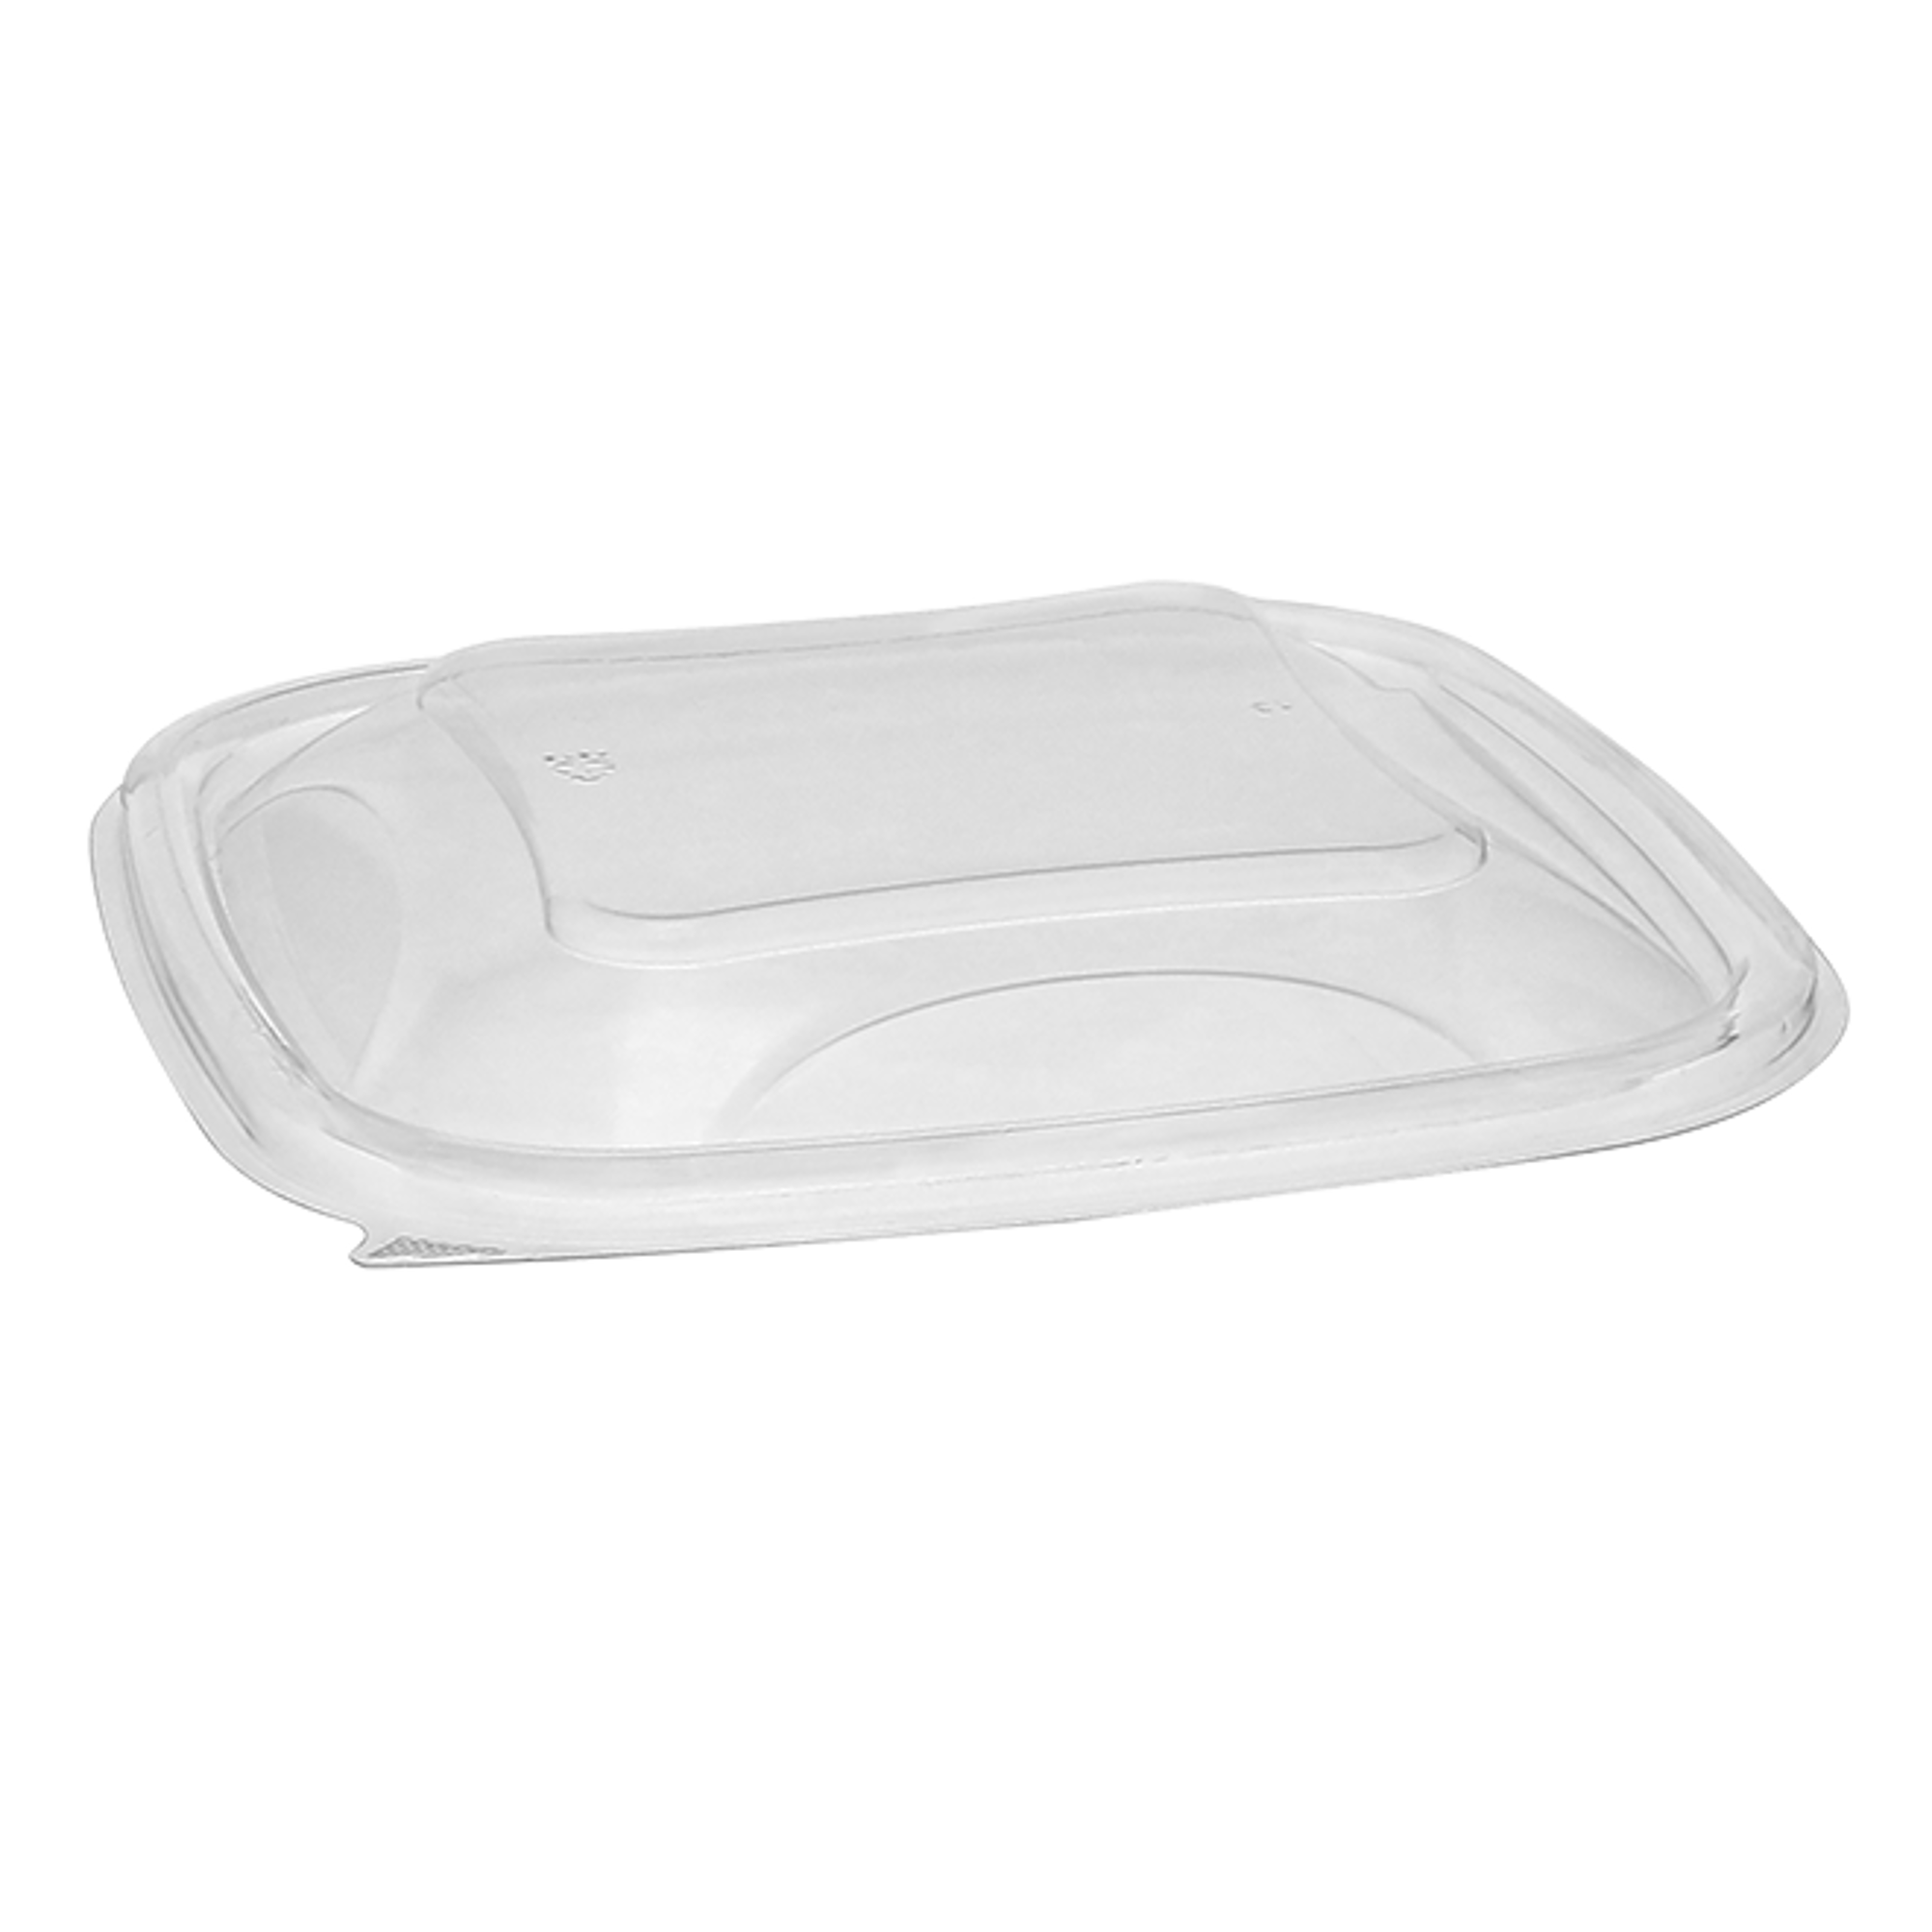 Sabert rPET Clear Dome Lid for Square Sandwich Container - 5.15 -  530606D300 - 300/Case - US Supply House